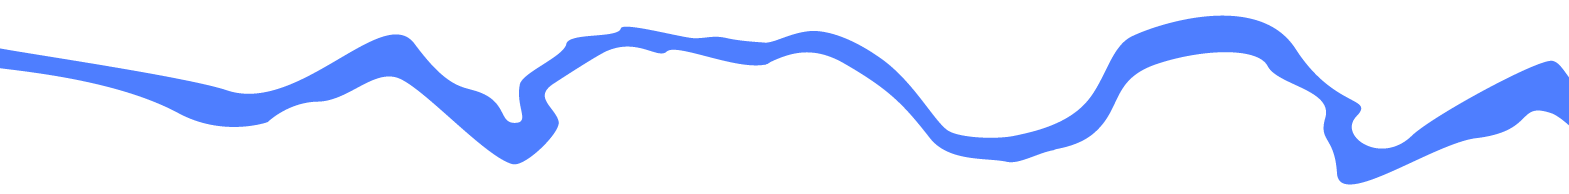 Shape of a river, dividing the text.